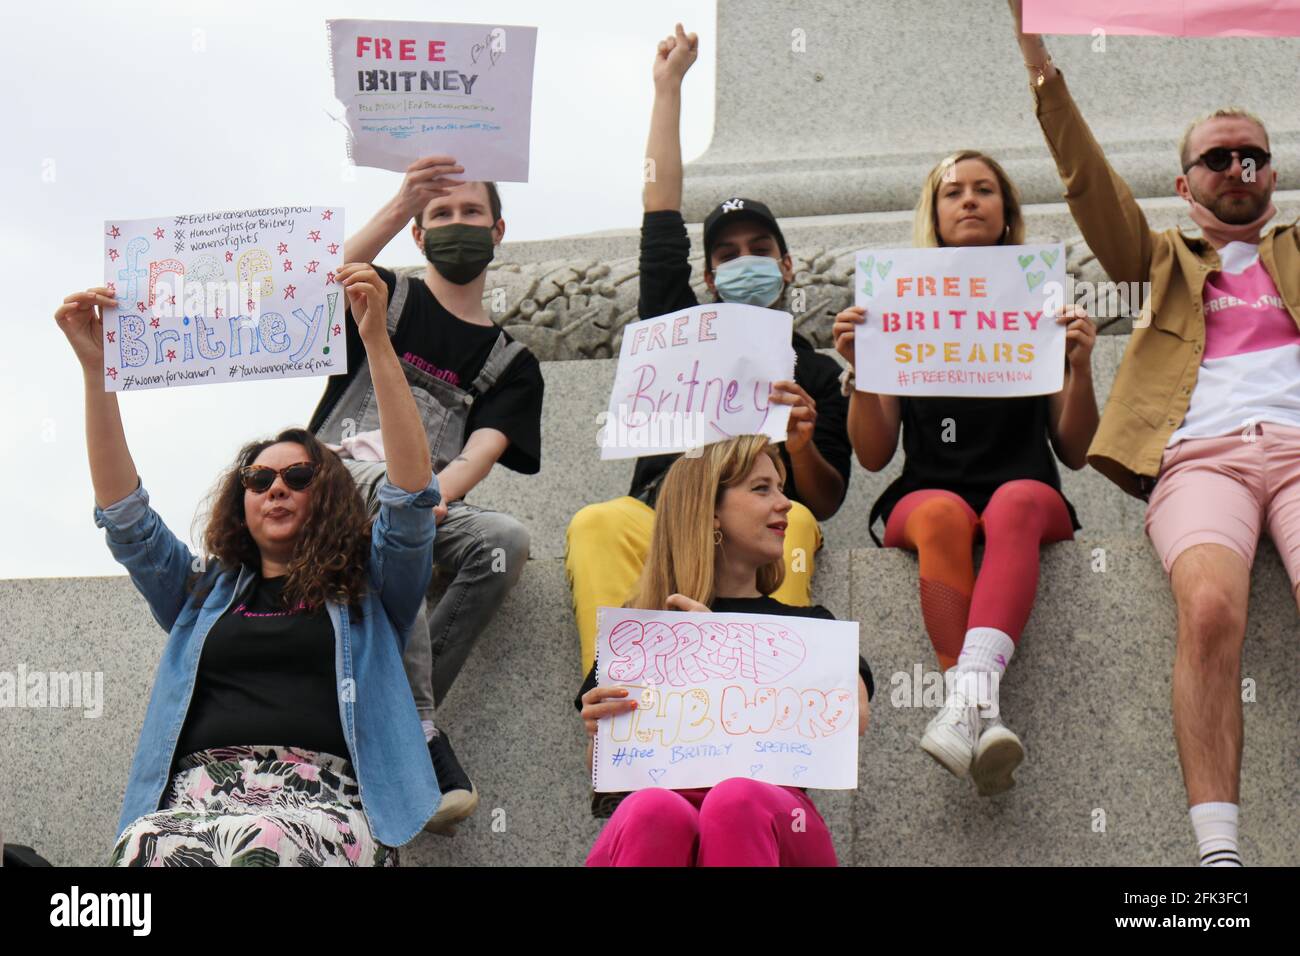 LONDON, ENGLAND, APRIL 27 2021, UK's First Free Britney Rally, #FreeBritney activists protest on the streets of London following Spears attempt to remove her conservatorship Stock Photo